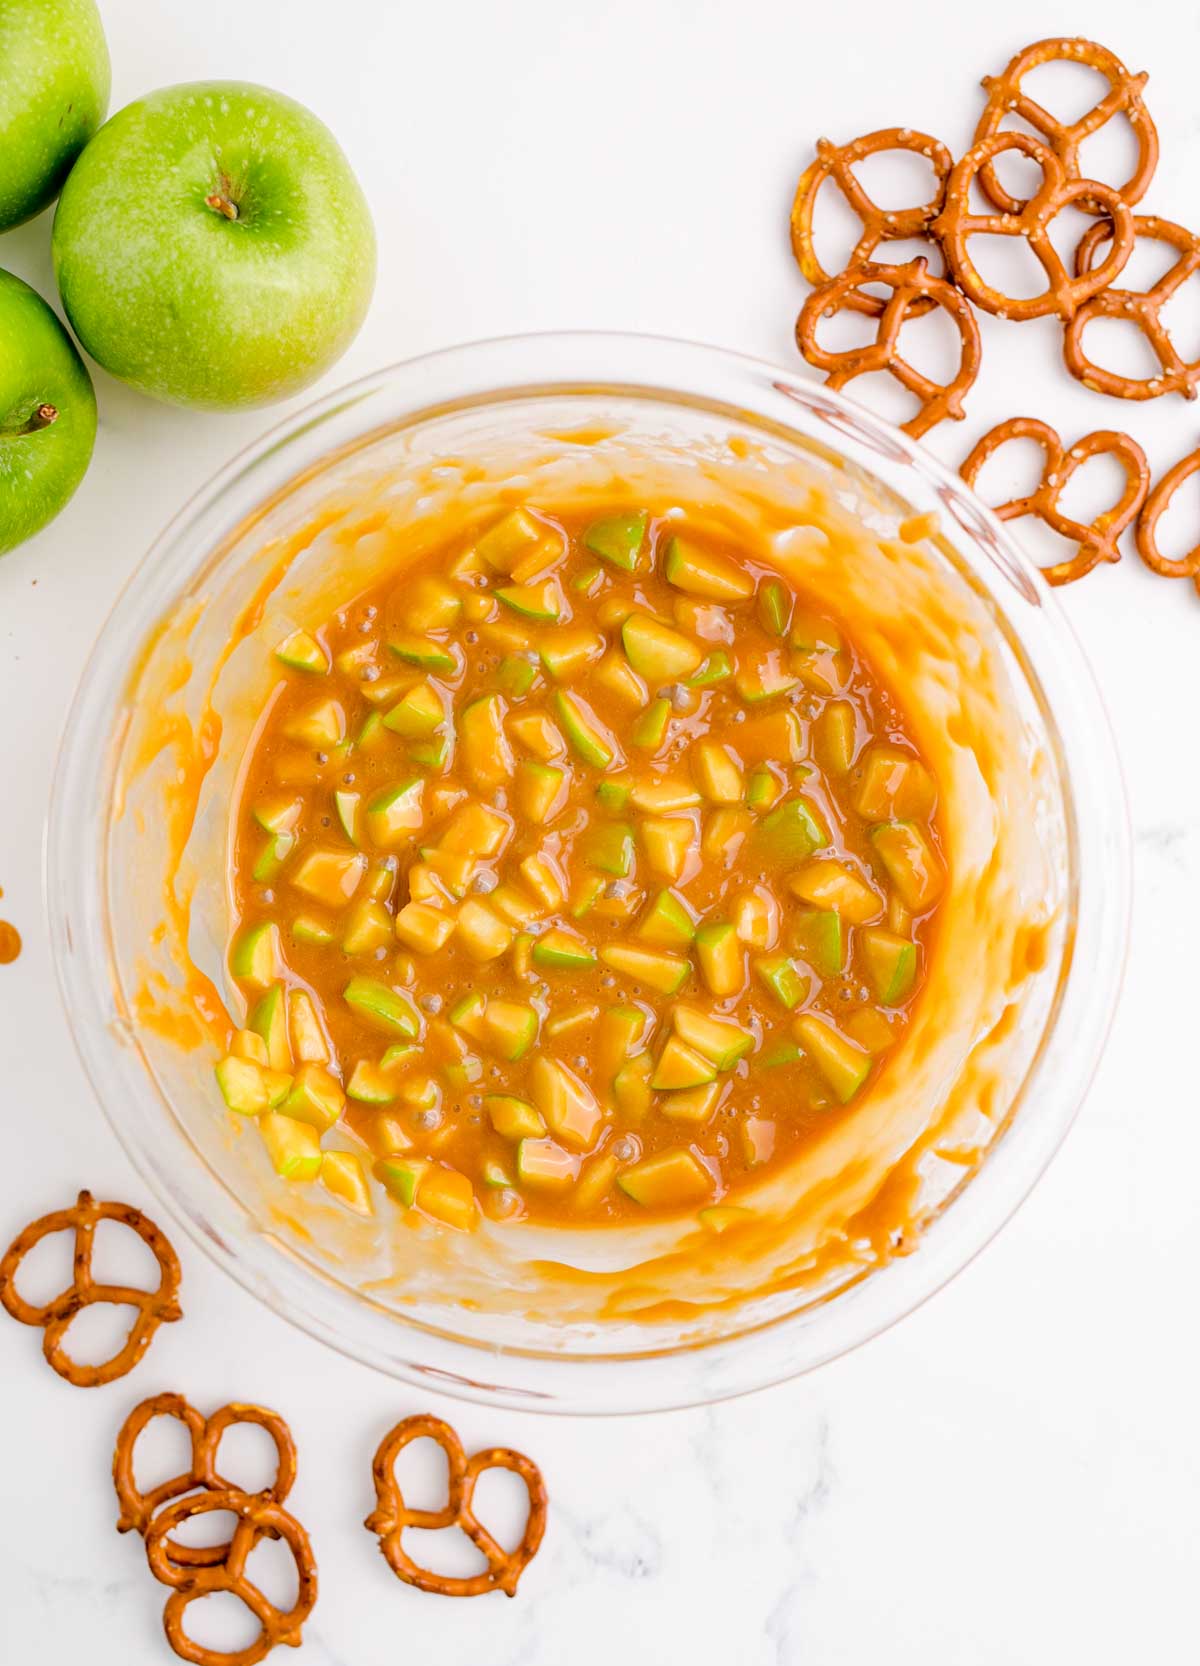 diced apples in a bowl of caramel